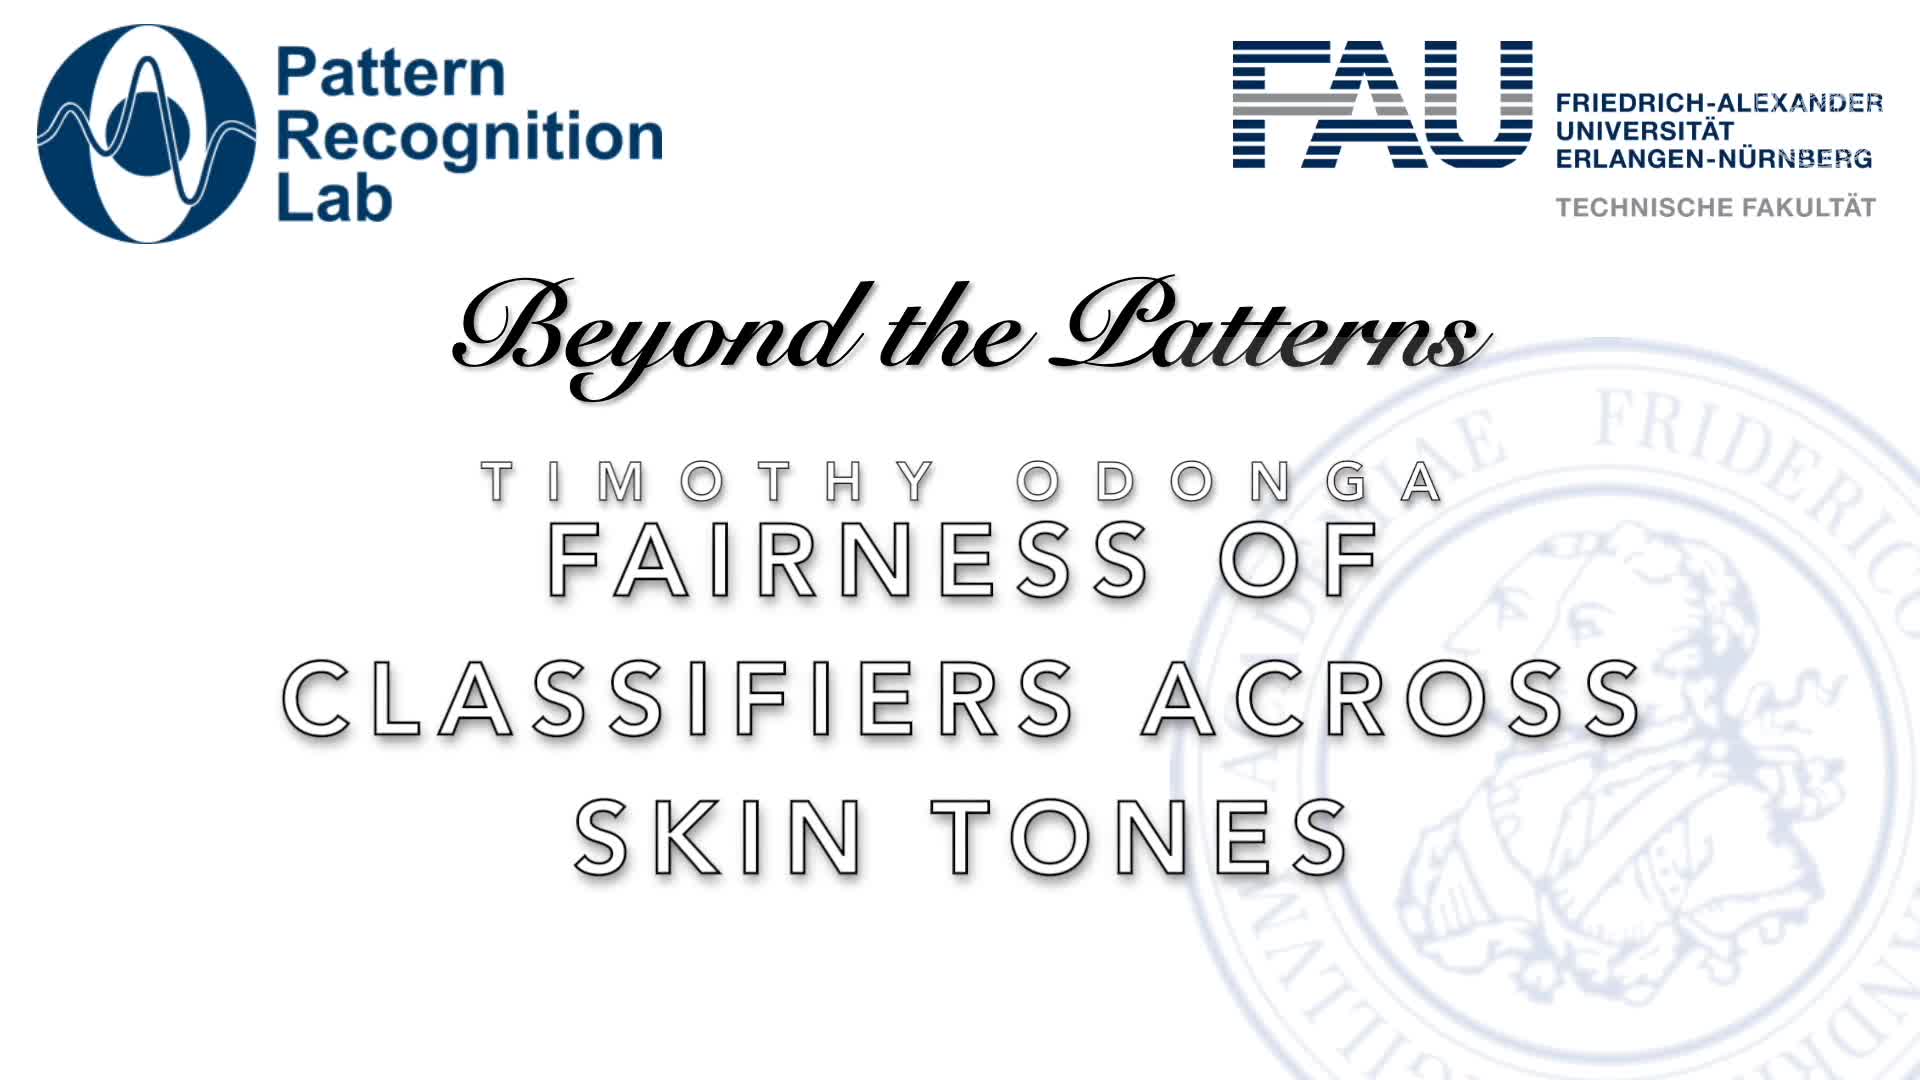 Beyond the Patterns - Timothy Odonga – Fairness of Classifiers Across Skin Tones in Dermatology preview image